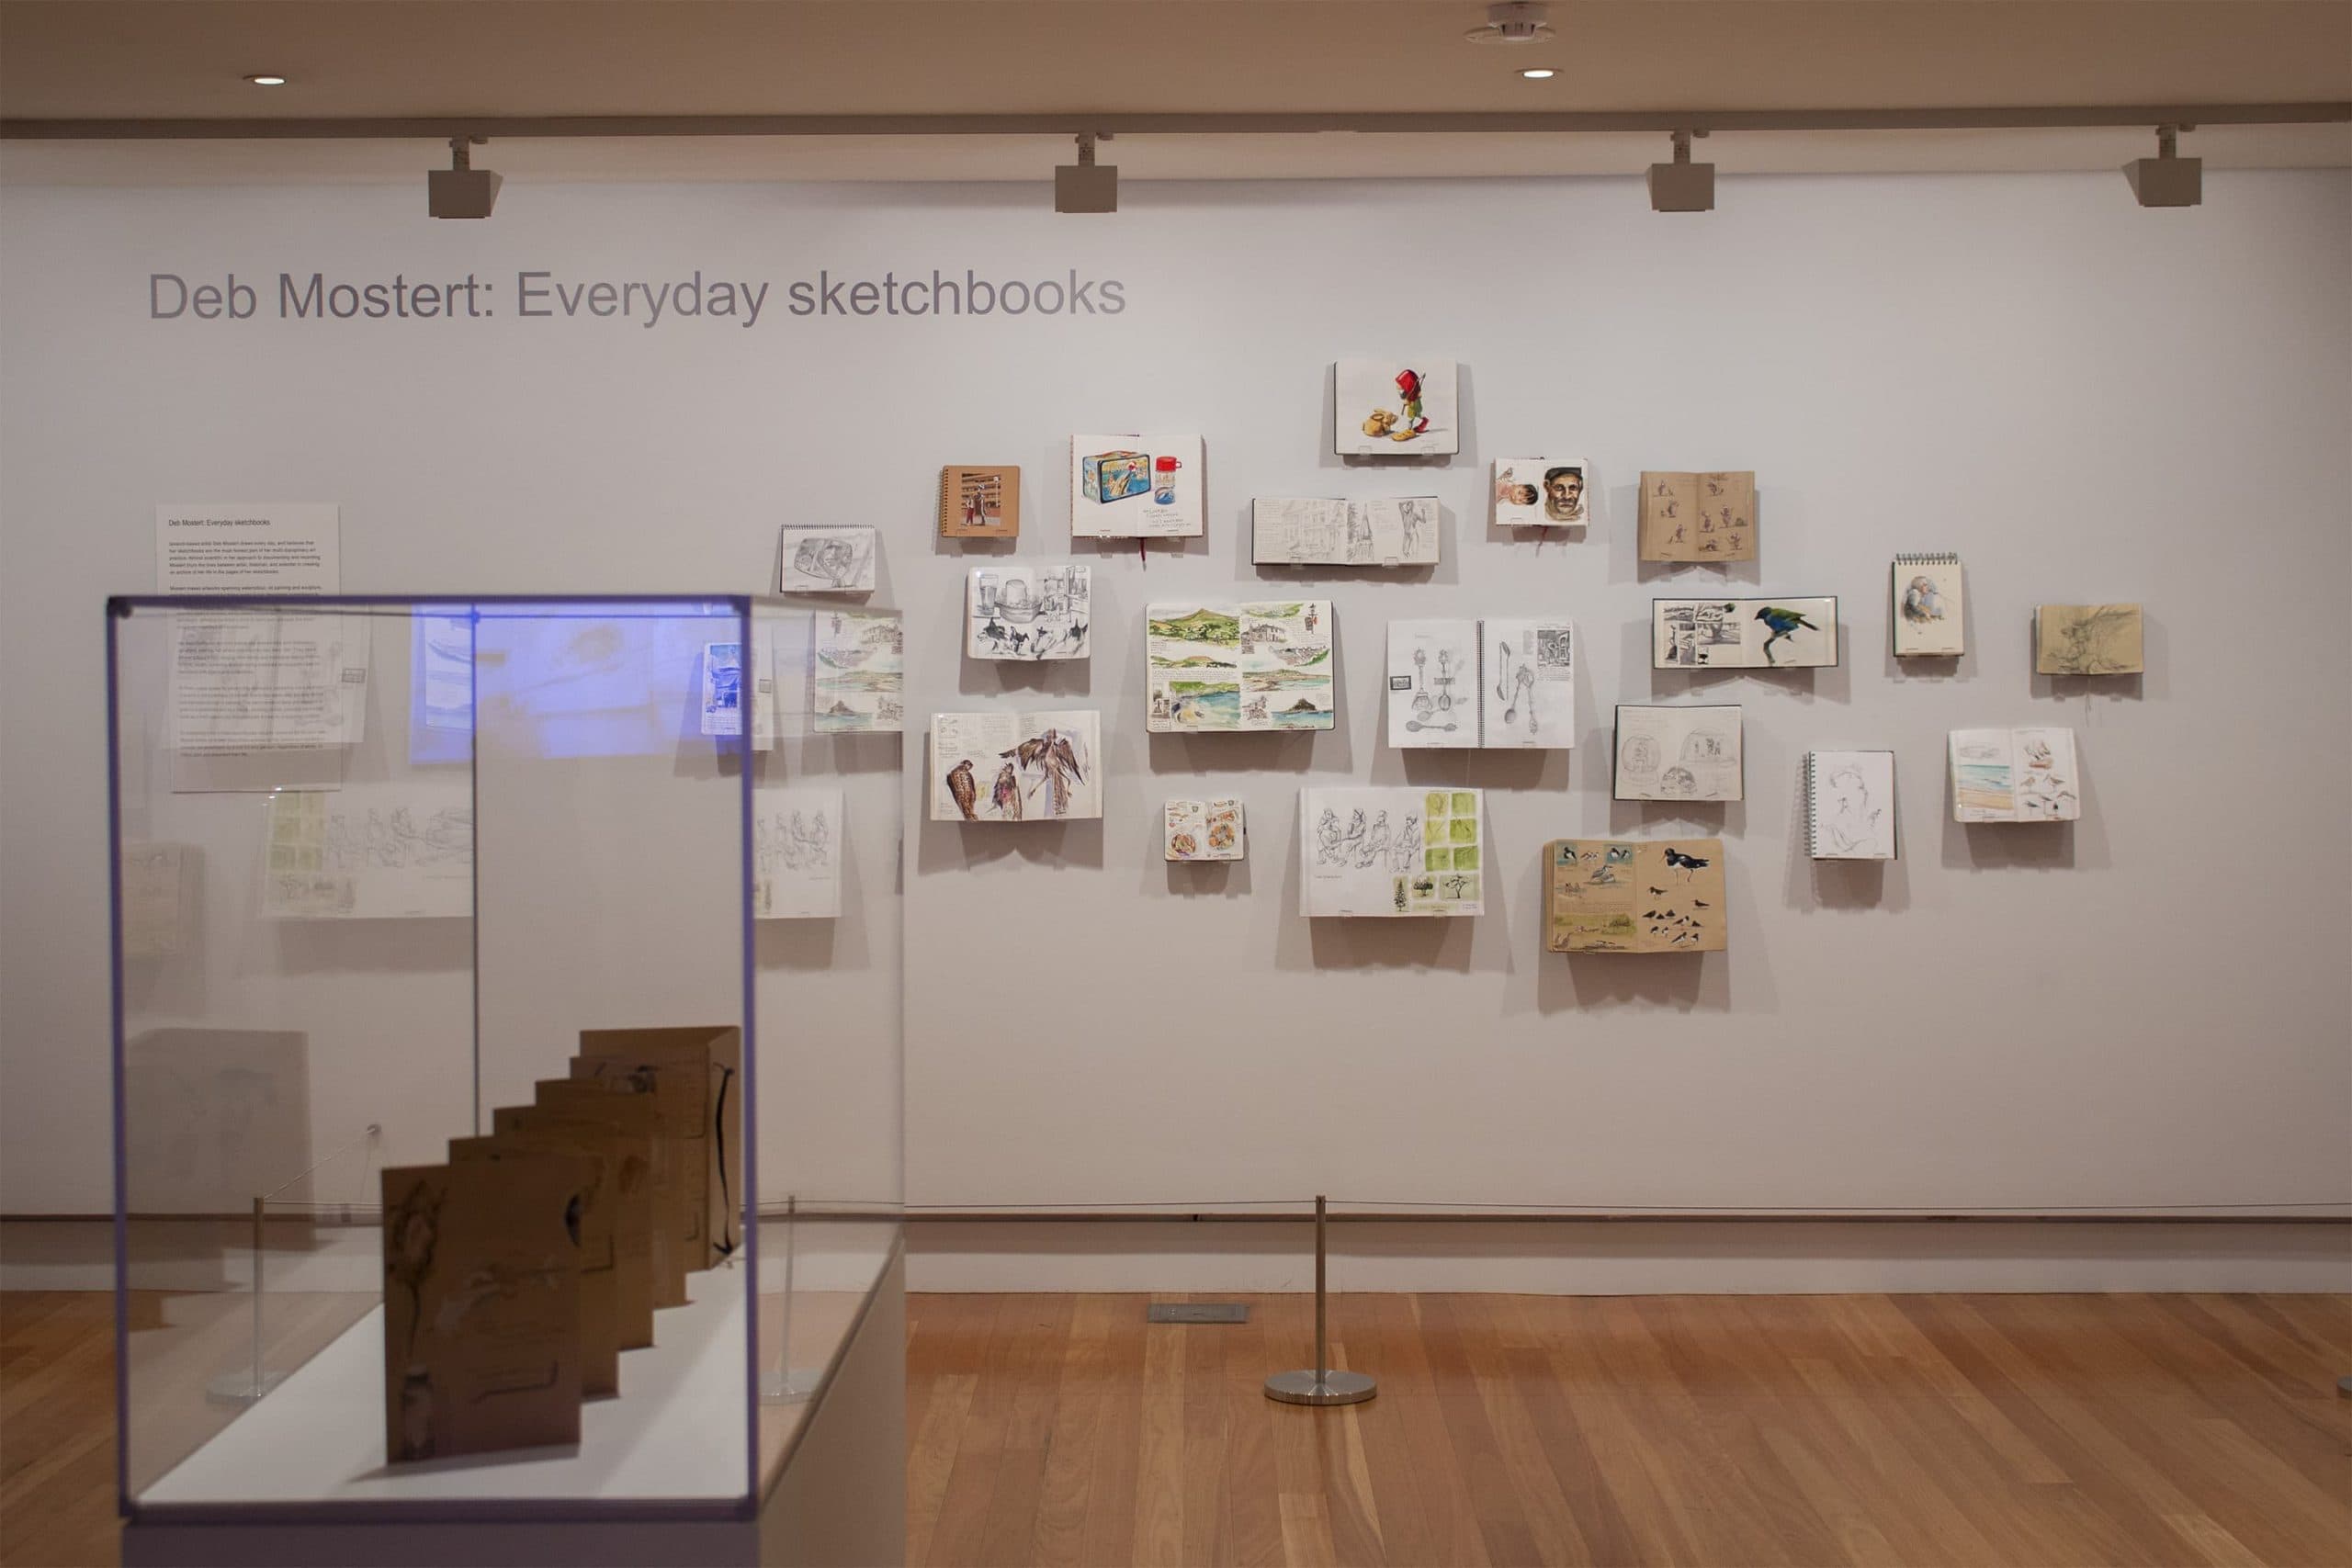 Deb Mostert: Everyday Sketchbooks Exhibition at Ipswich Gallery